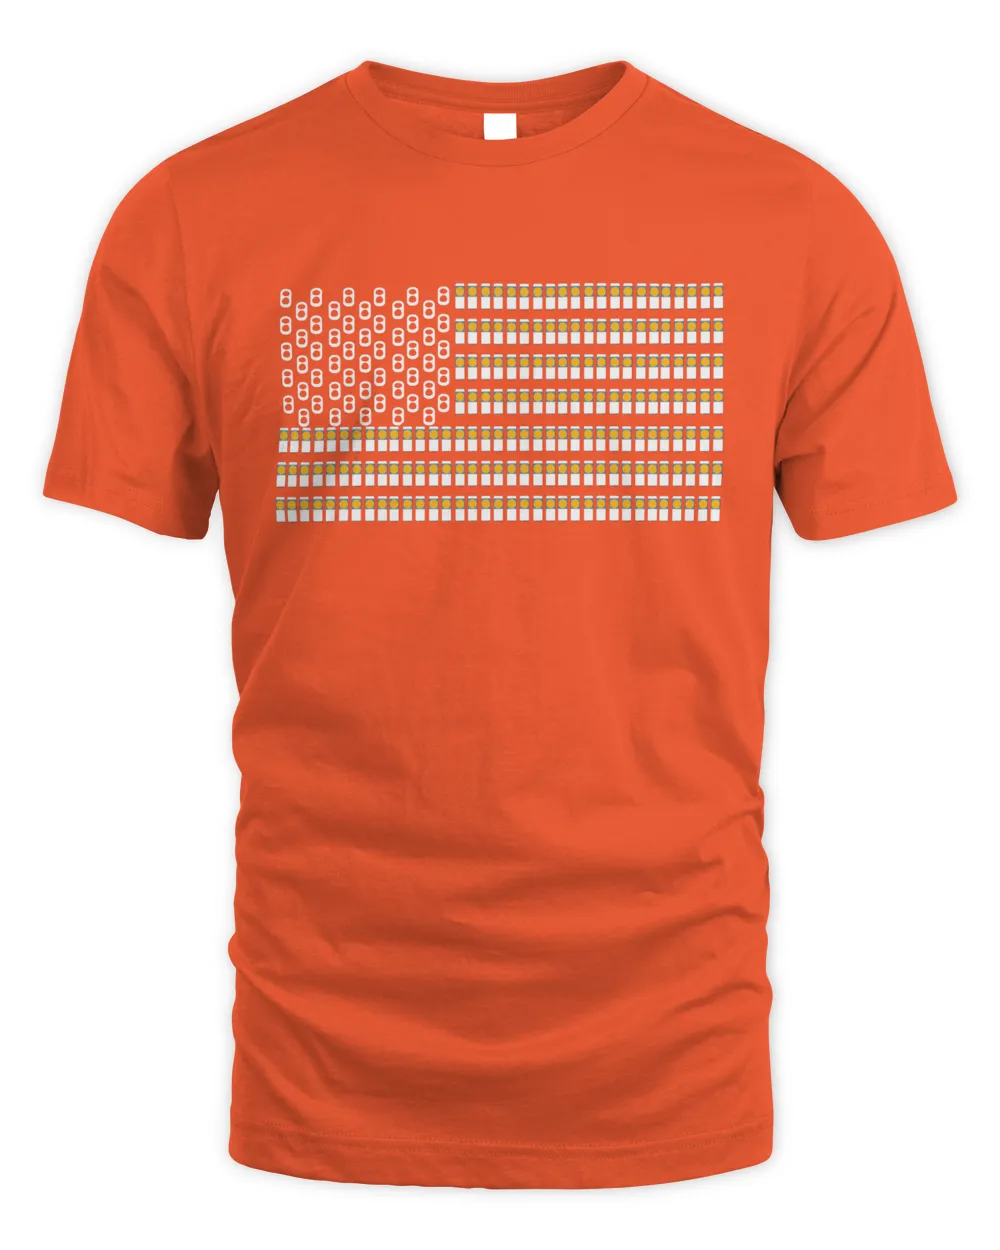 Nooners Can Flag Tee